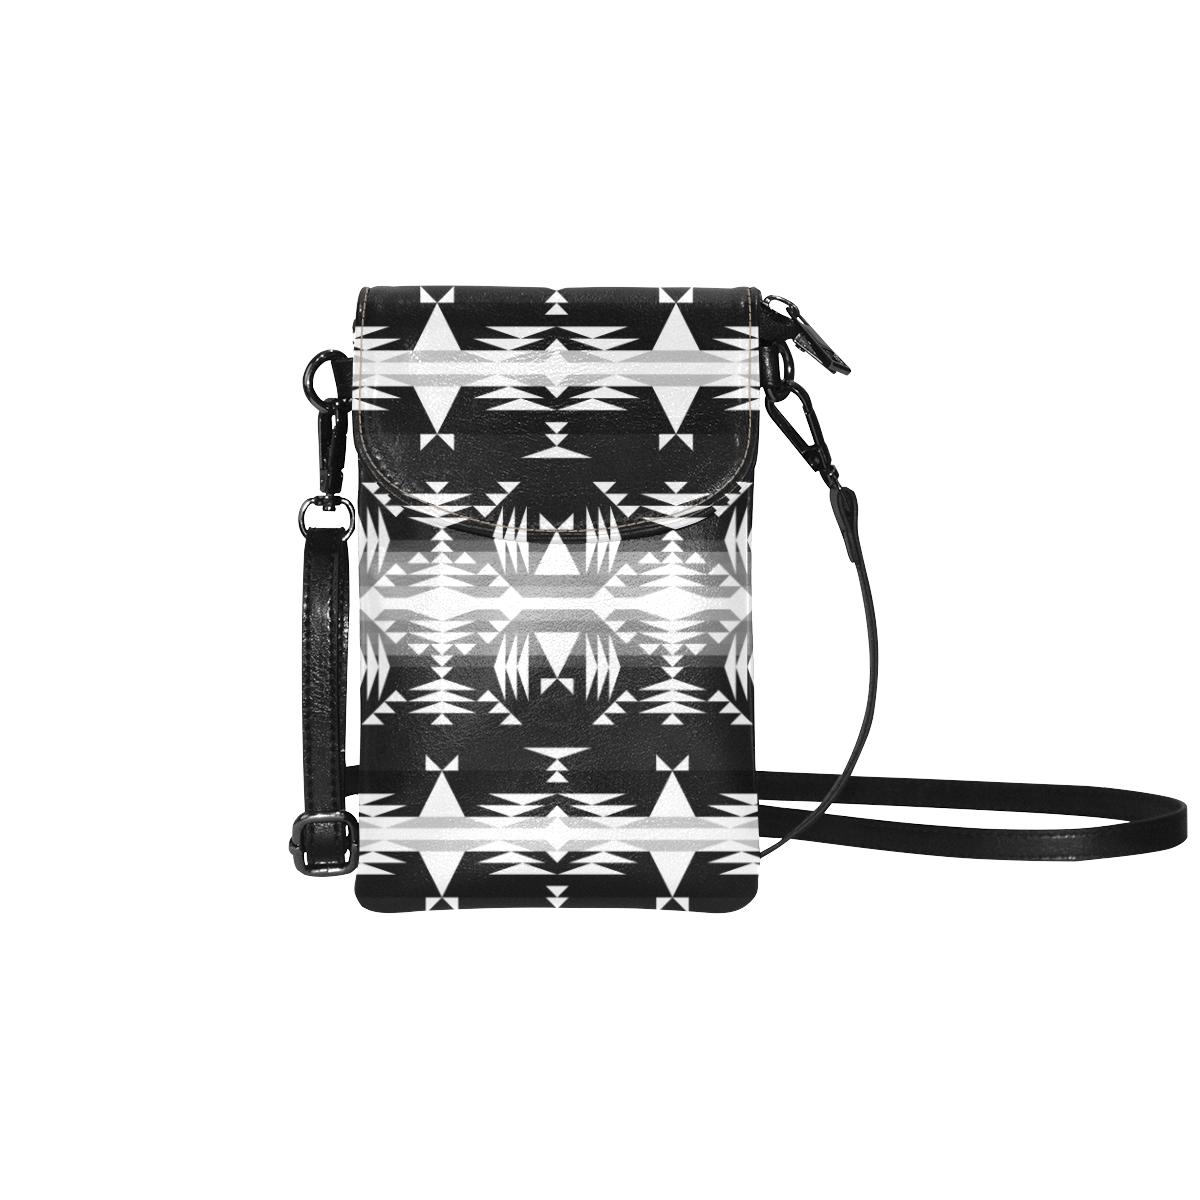 Between The Mountains Black and White Cell Phone Purse